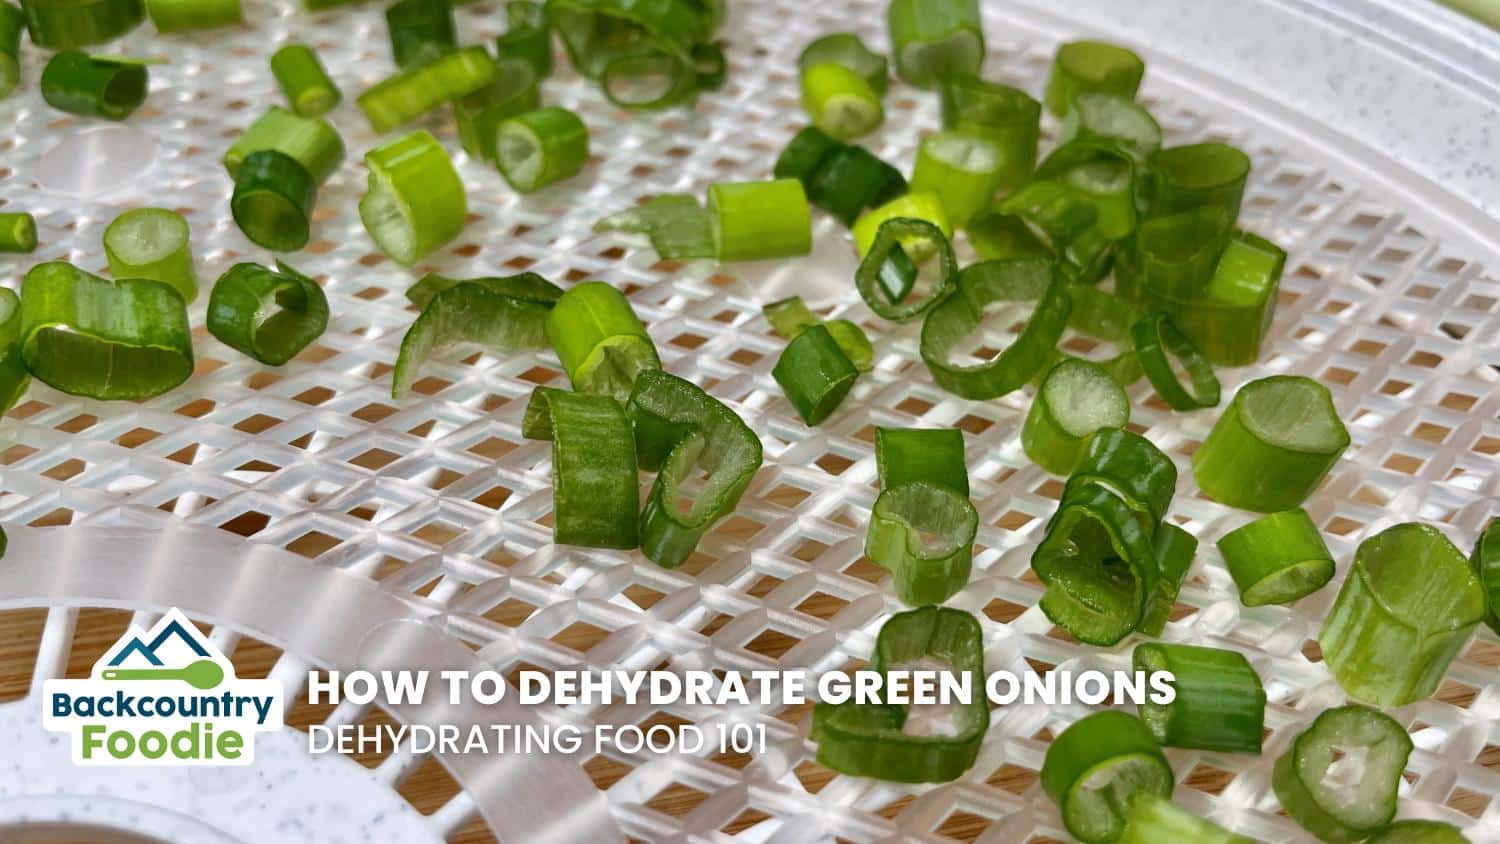 Backcountry Foodie Blog How to Dehydrate and Freeze Dry Green Onions Dehydrating Food 101